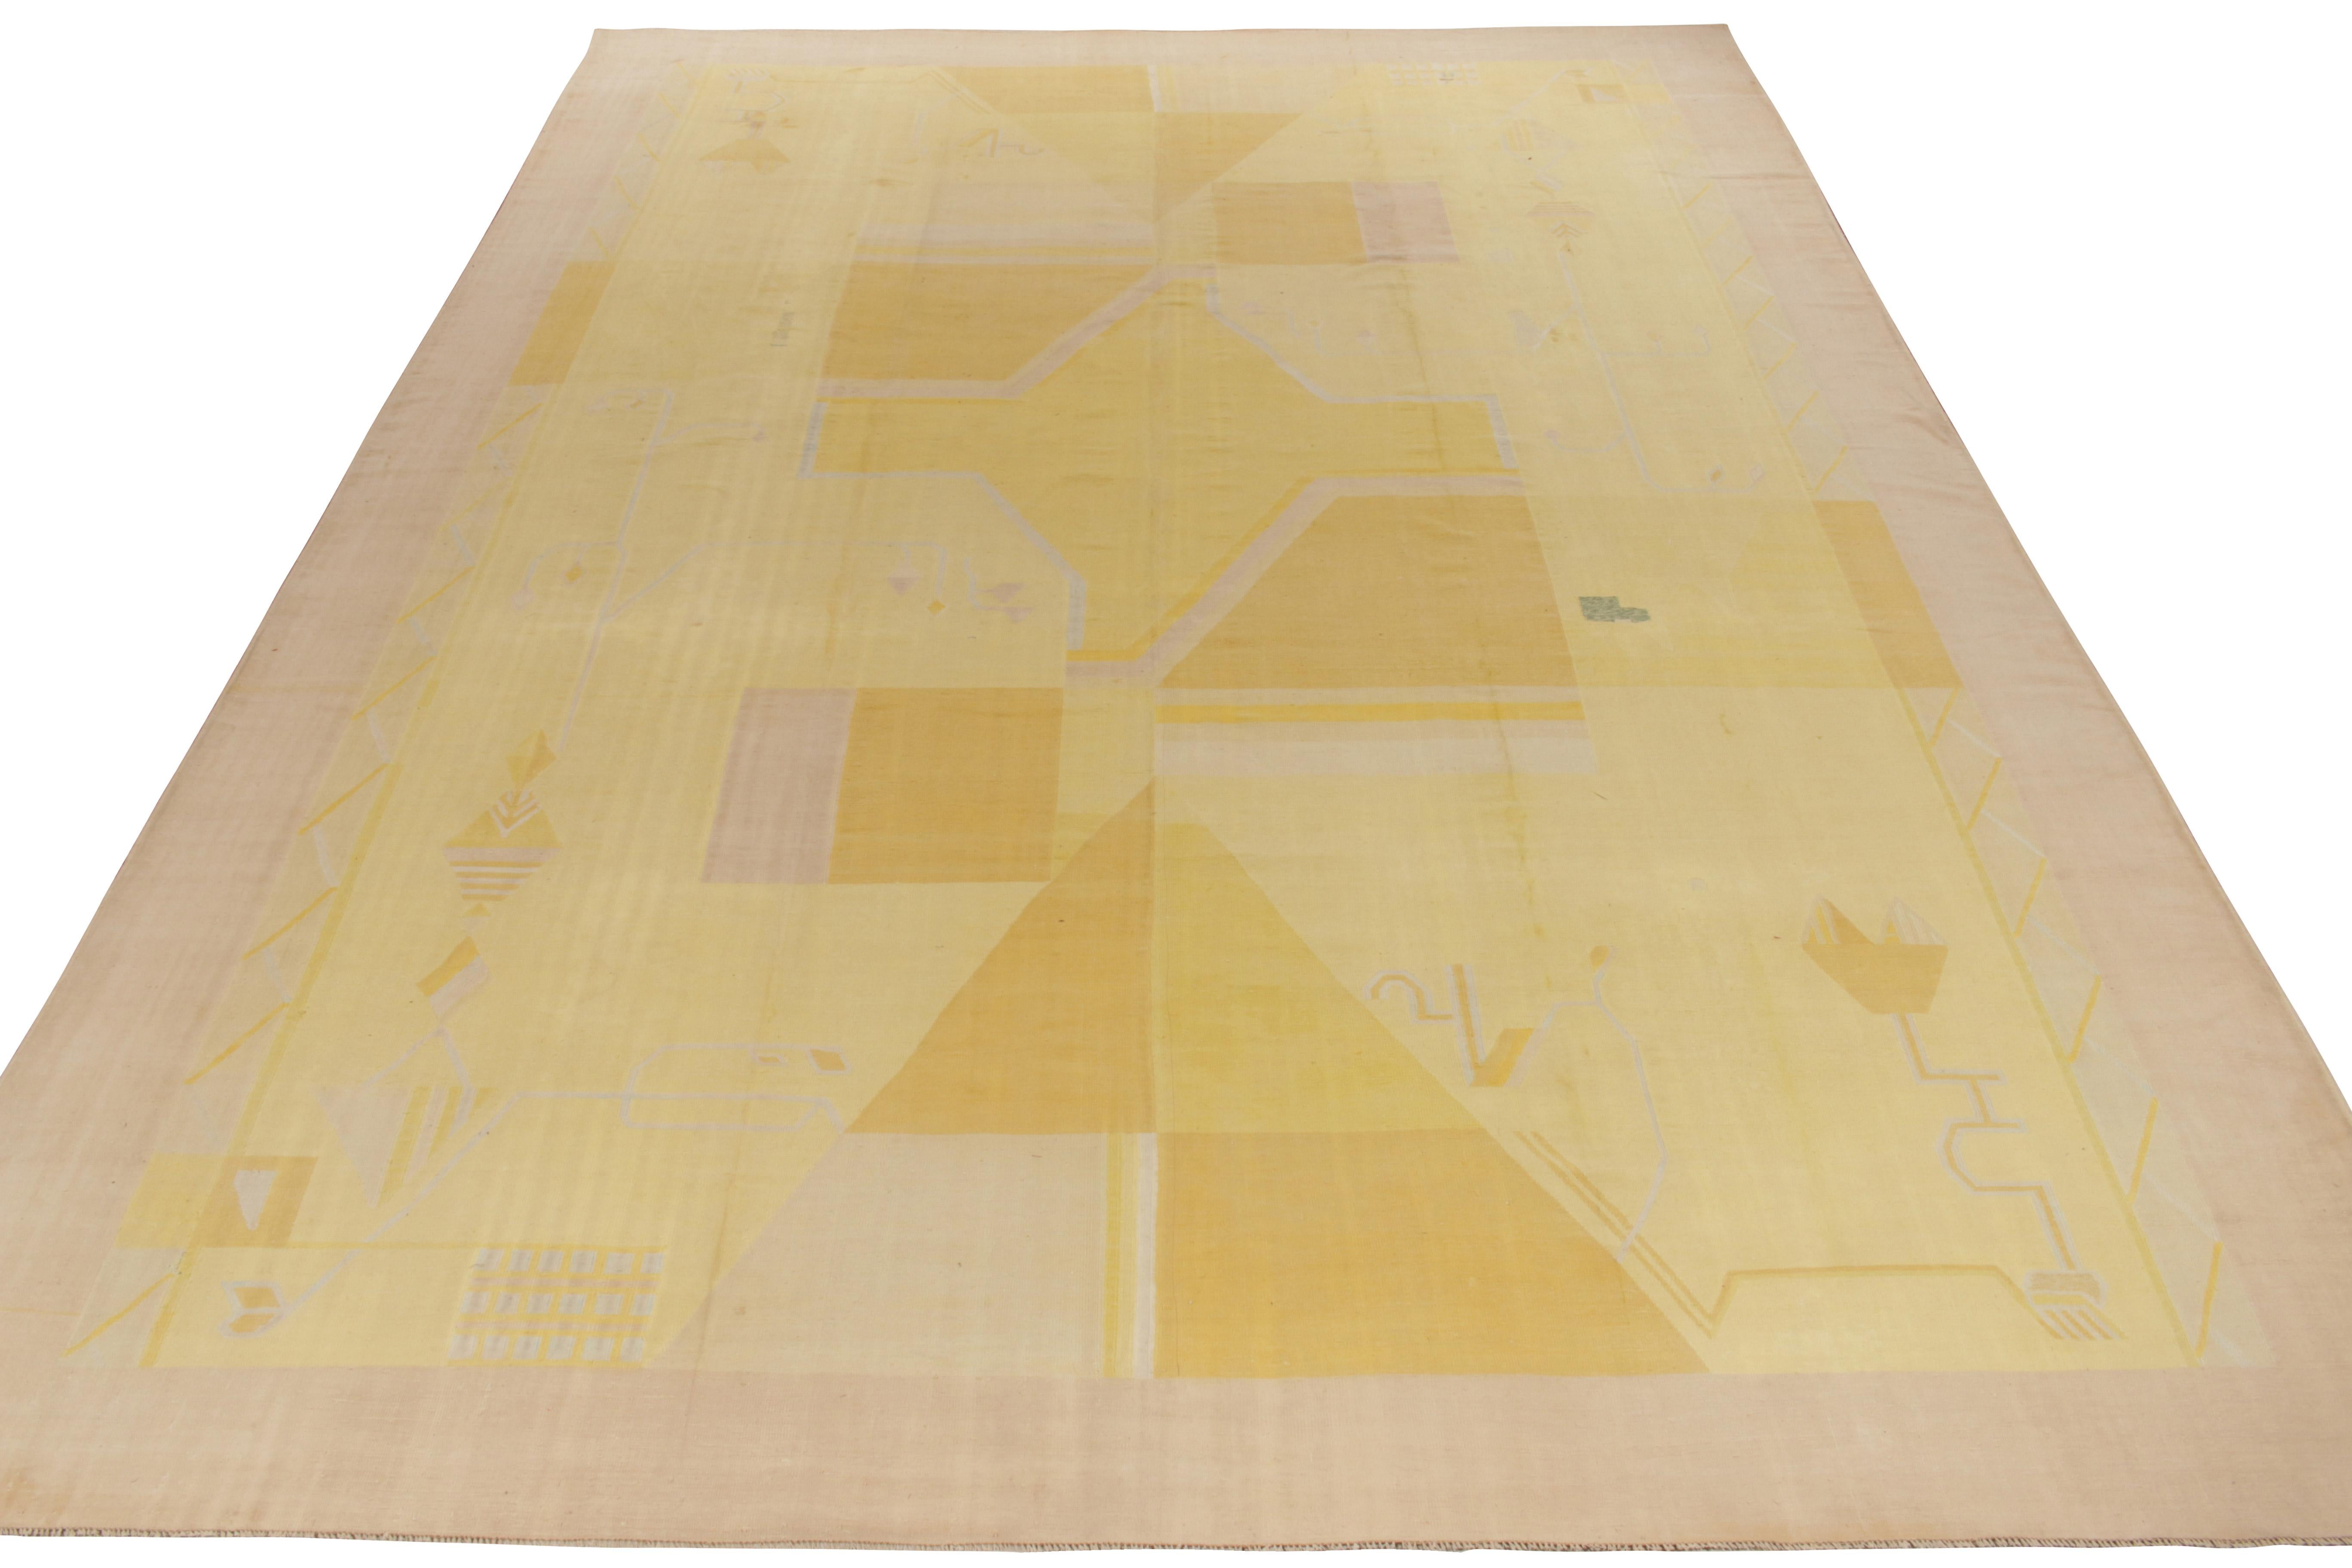 Handwoven in wool circa 1950-1960, a fabulous, rare vintage Indian Kilim rug boasting a union of mid century sensibilities with an art deco pattern in canary yellow and luscious cream tones. In excellent condition, a rare 12x17 piece capable of